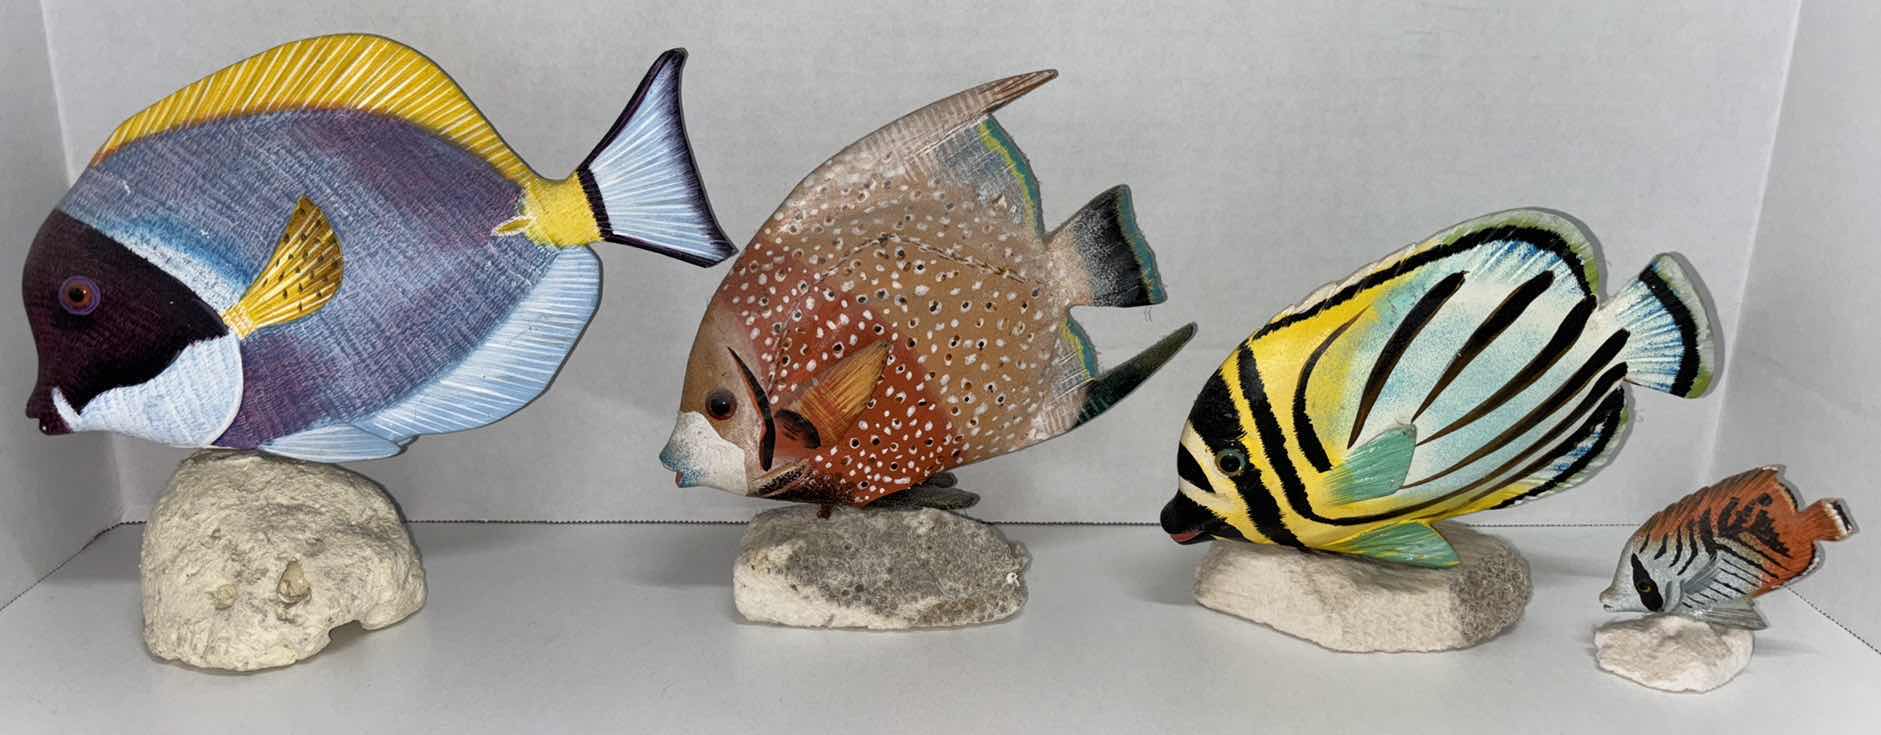 Photo 1 of NAUTICAL CARVED WOOD & HAND-PAINTED FISH FIGURINE DECOR